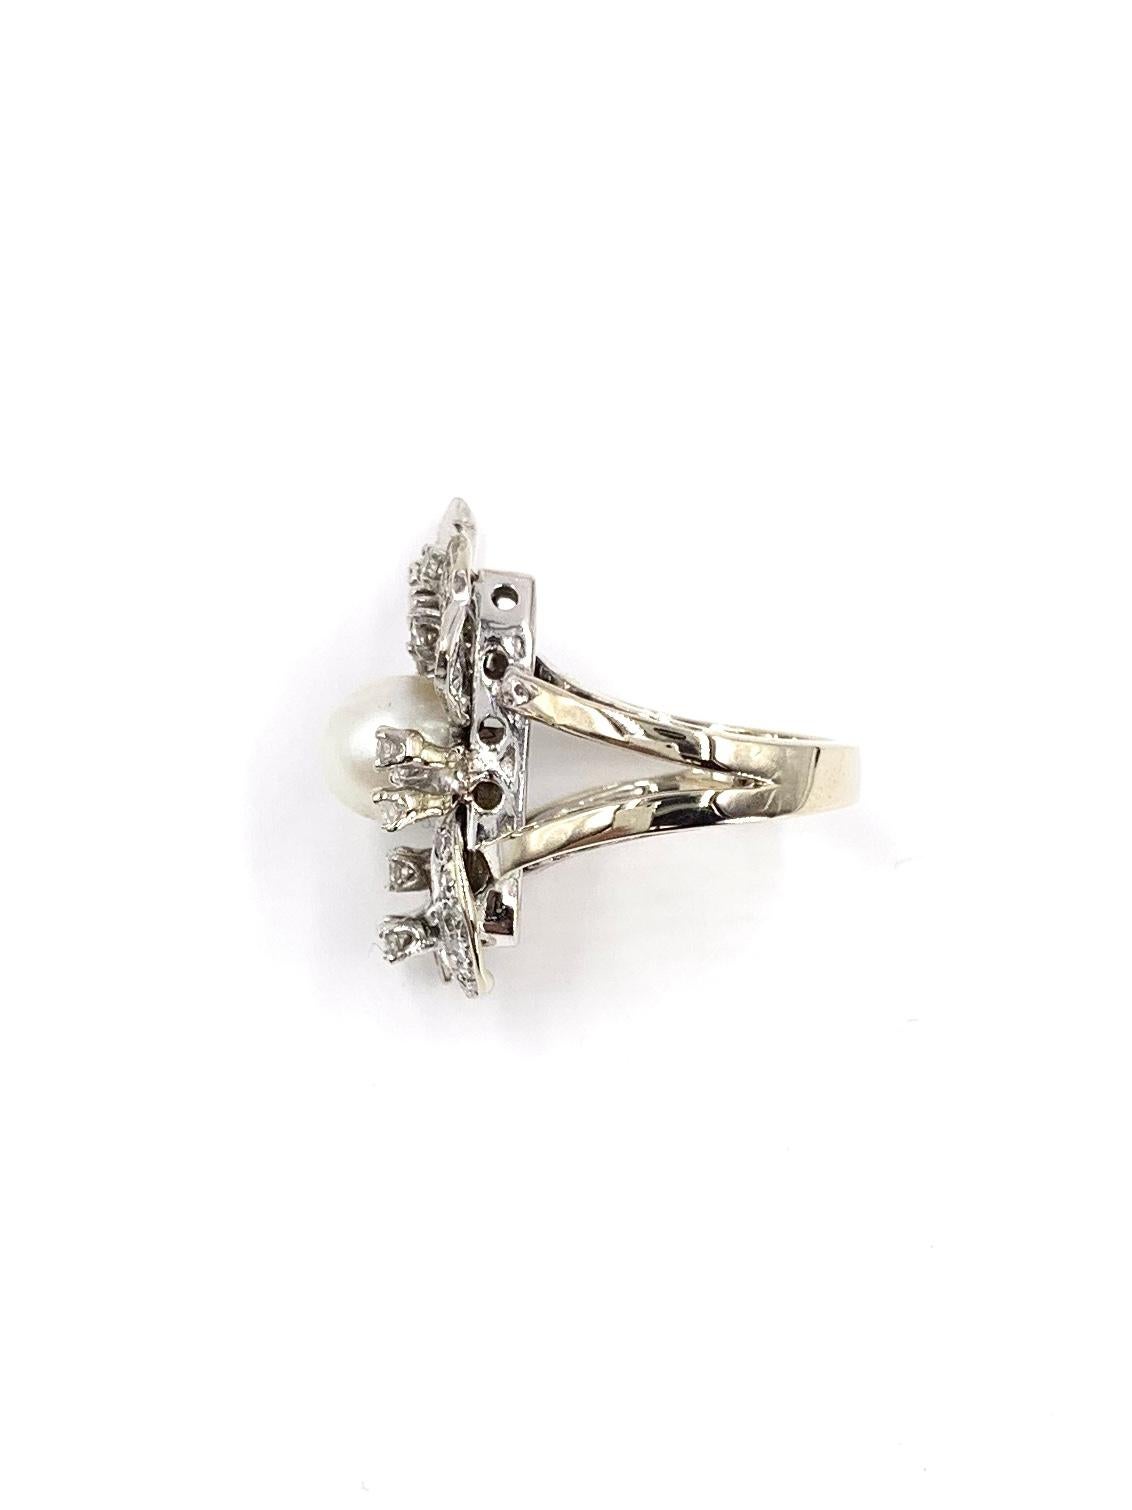 White Gold Diamond and Pearl Edwardian Inspired Cocktail Ring For Sale 4